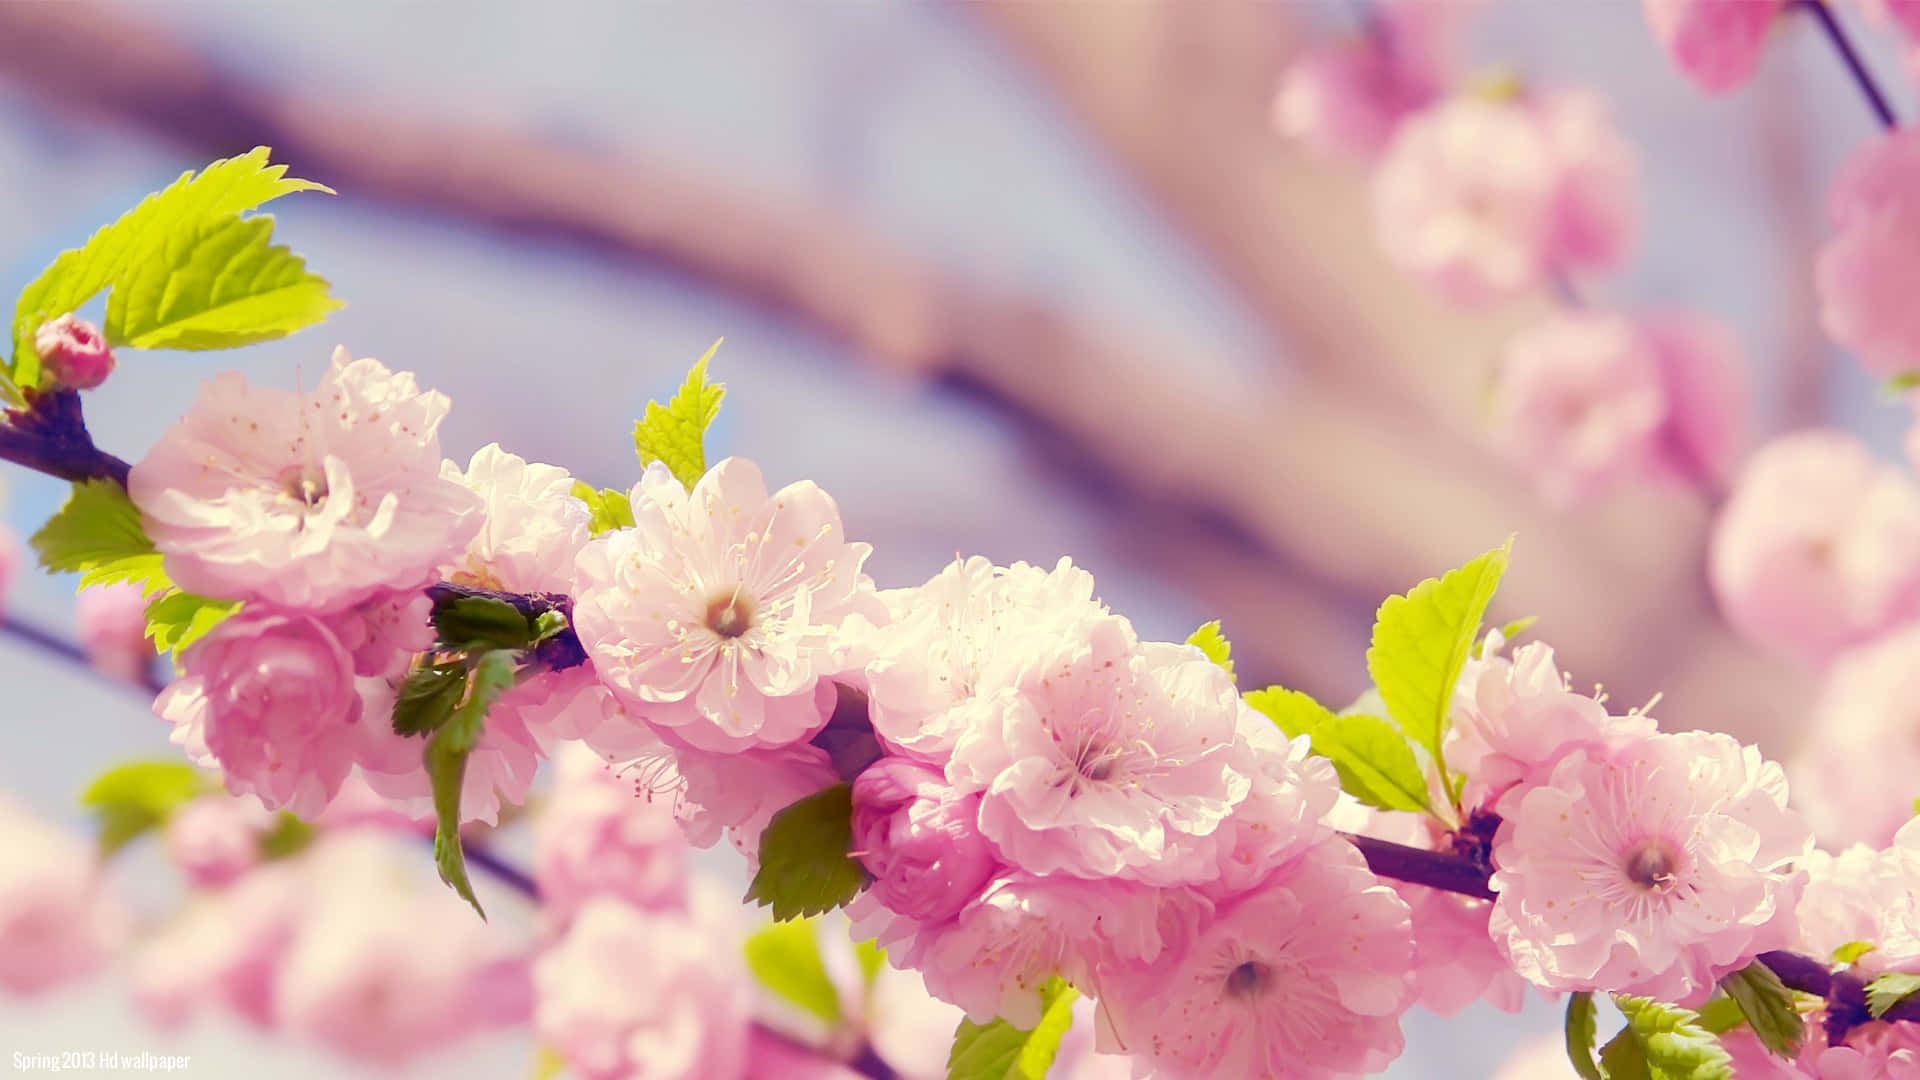 Welcome the blooming season with a beautiful HD spring background